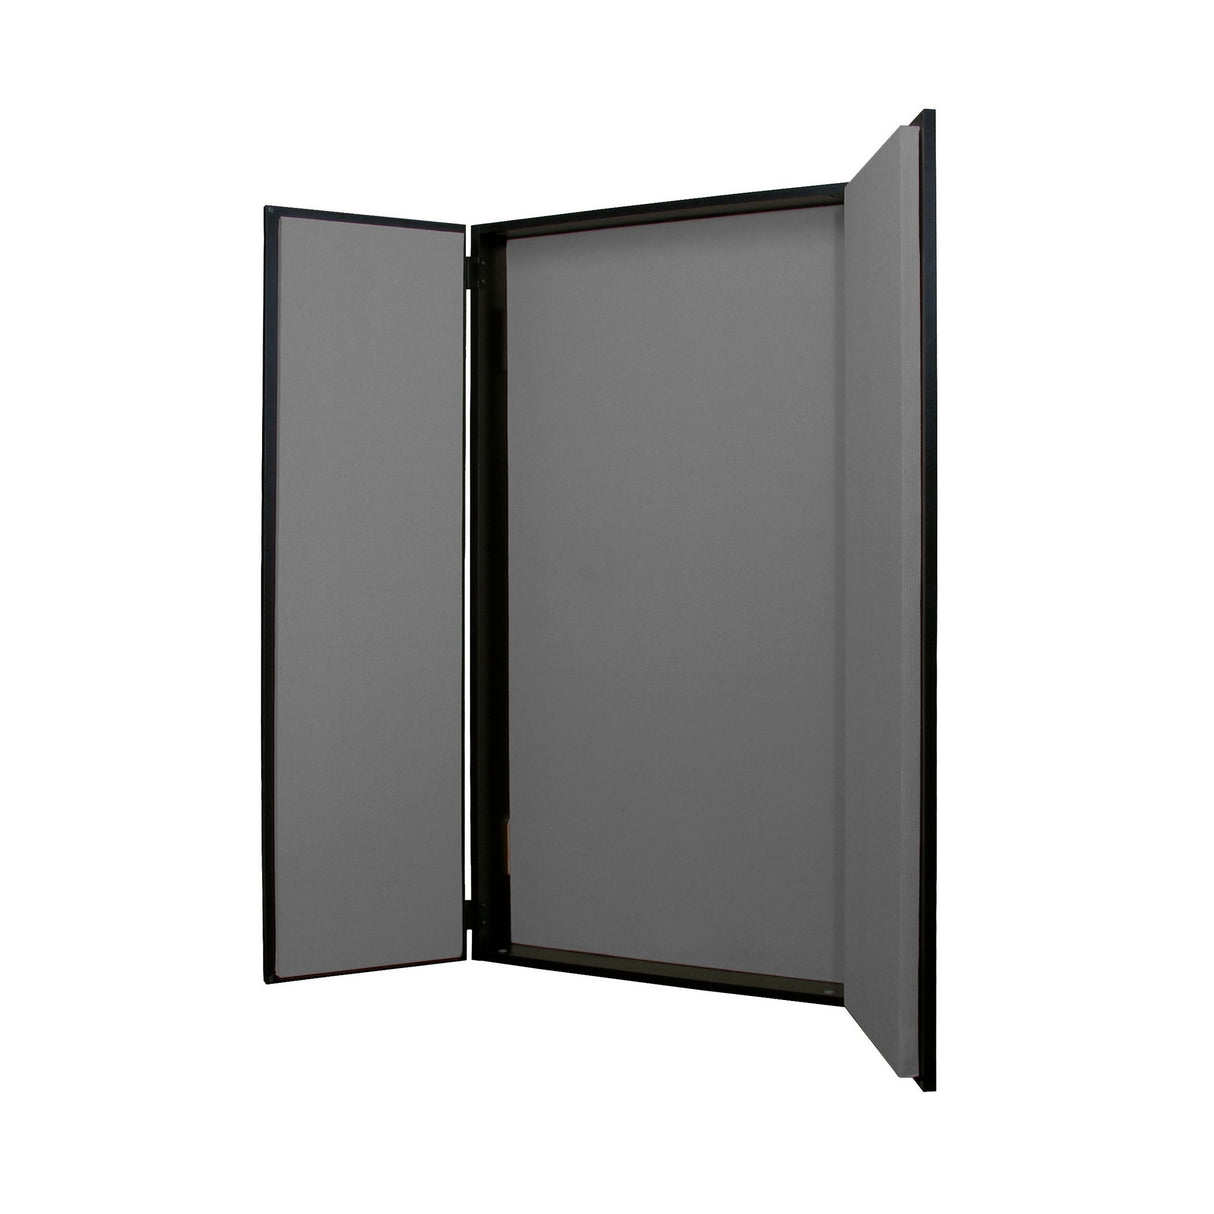 Primacoustic FlexiBooth 24 x 48 x 6-Inch Wall Mount Vocal Booth, Black/Grey